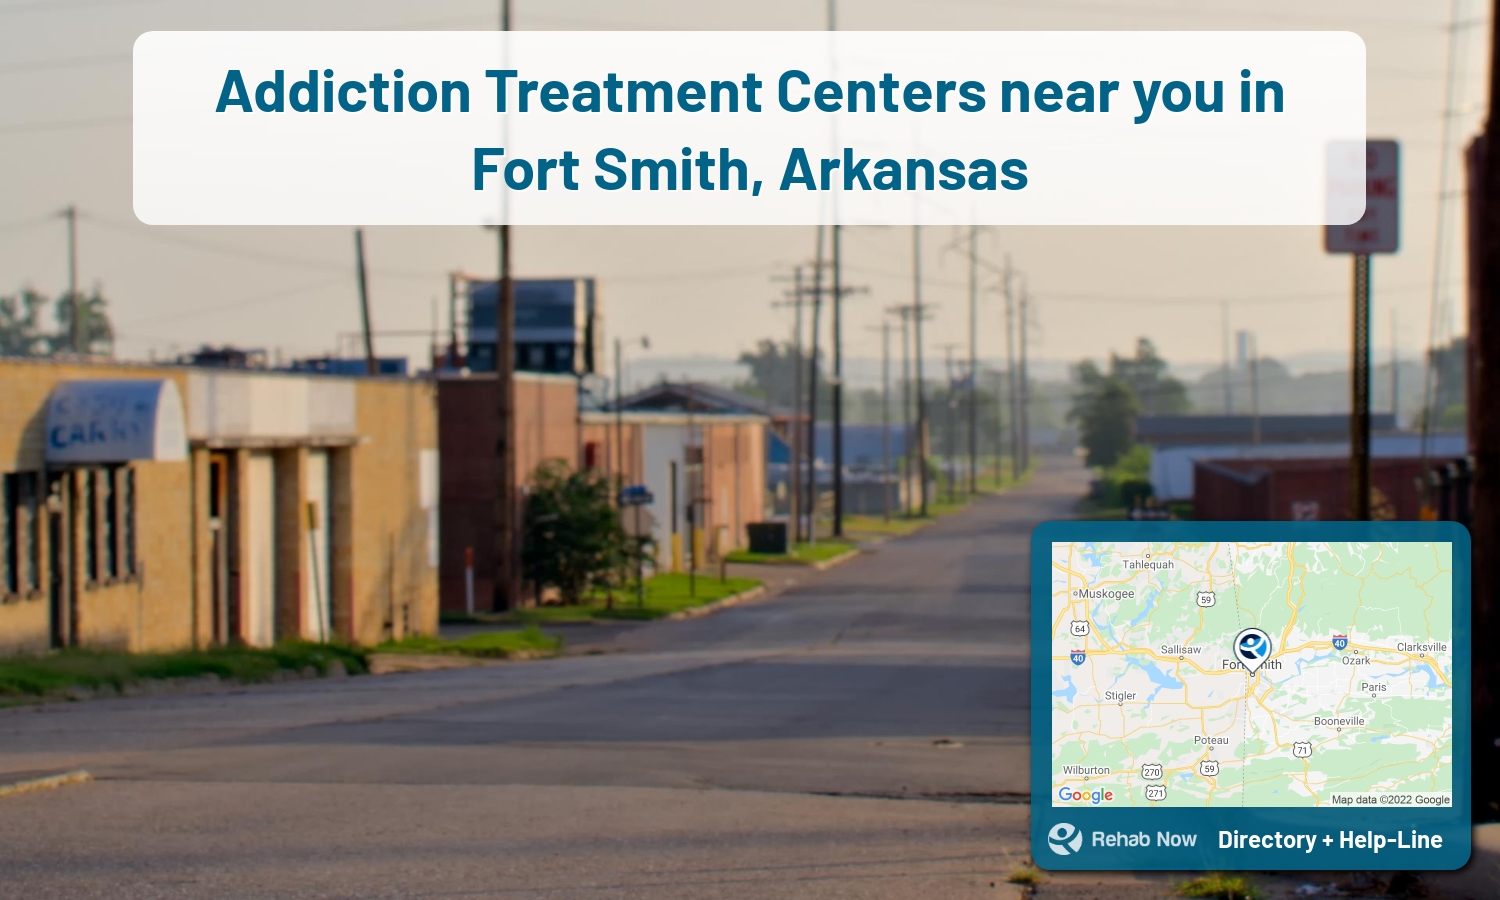 Fort Smith, AR Treatment Centers. Find drug rehab in Fort Smith, Arkansas, or detox and treatment programs. Get the right help now!